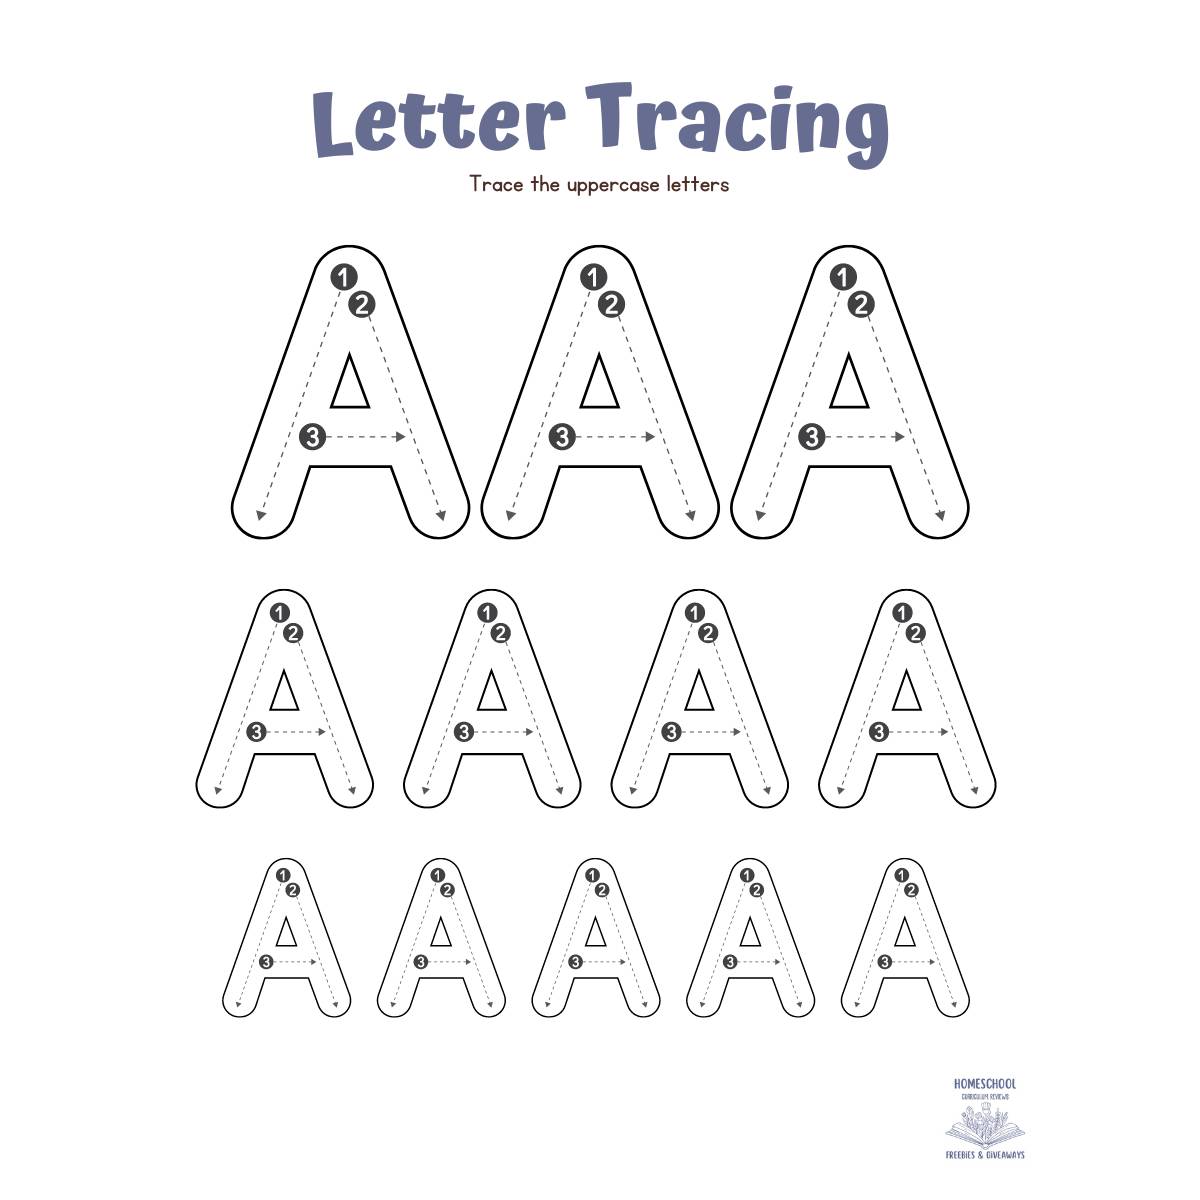 multiple uppercase letter A's ready for tracing in varying sizes to teach hand eye coordination